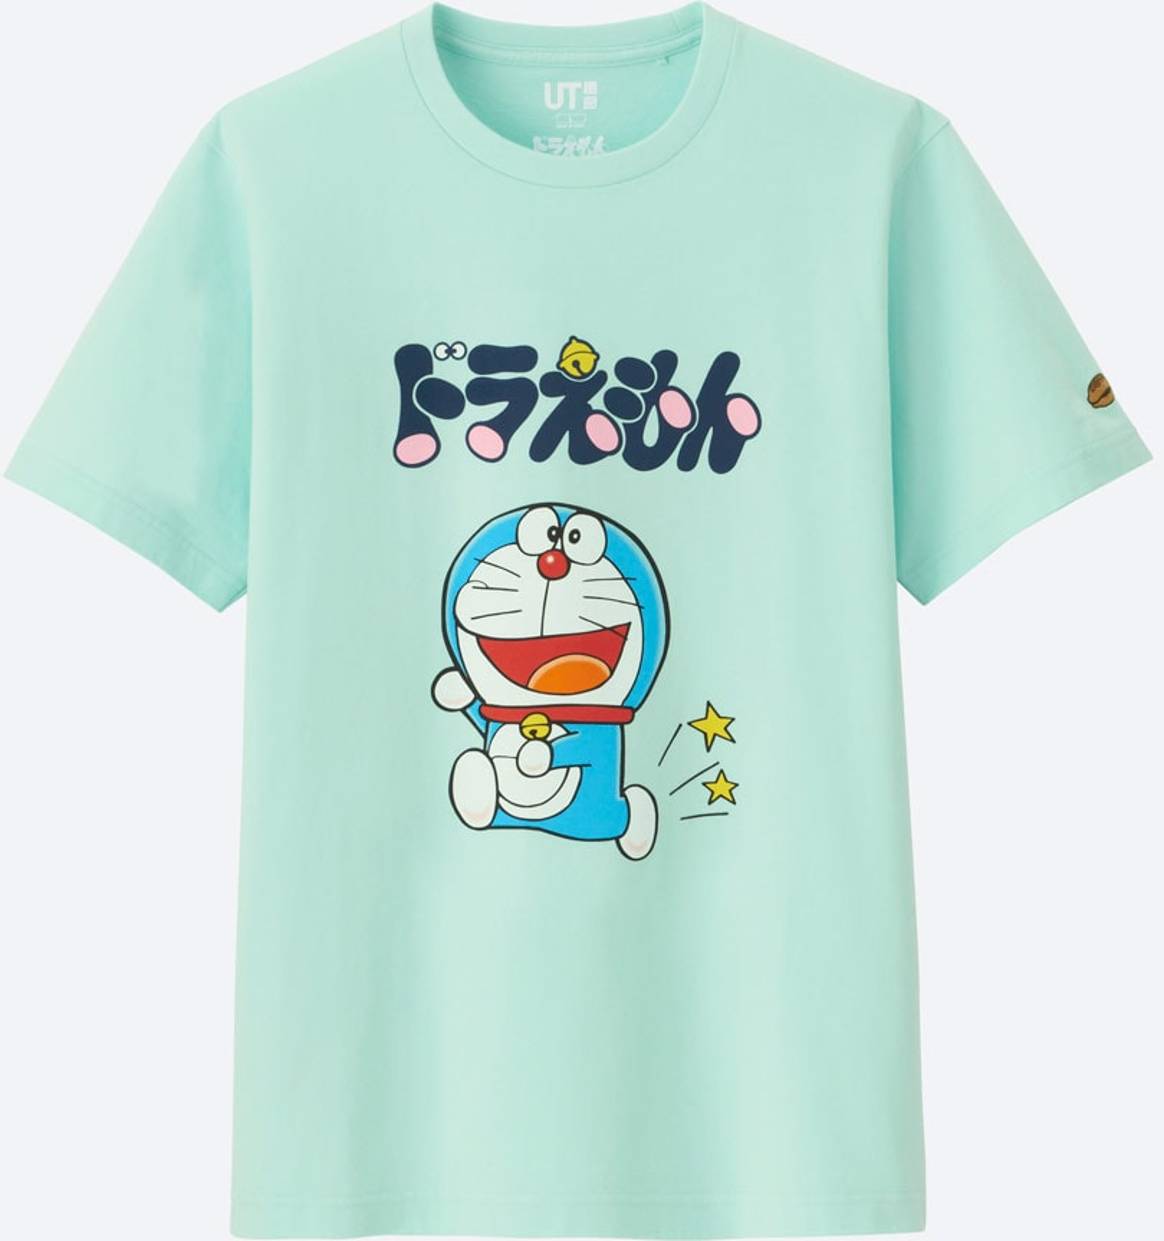 Uniqlo launches collection with artist Takashi Murakami